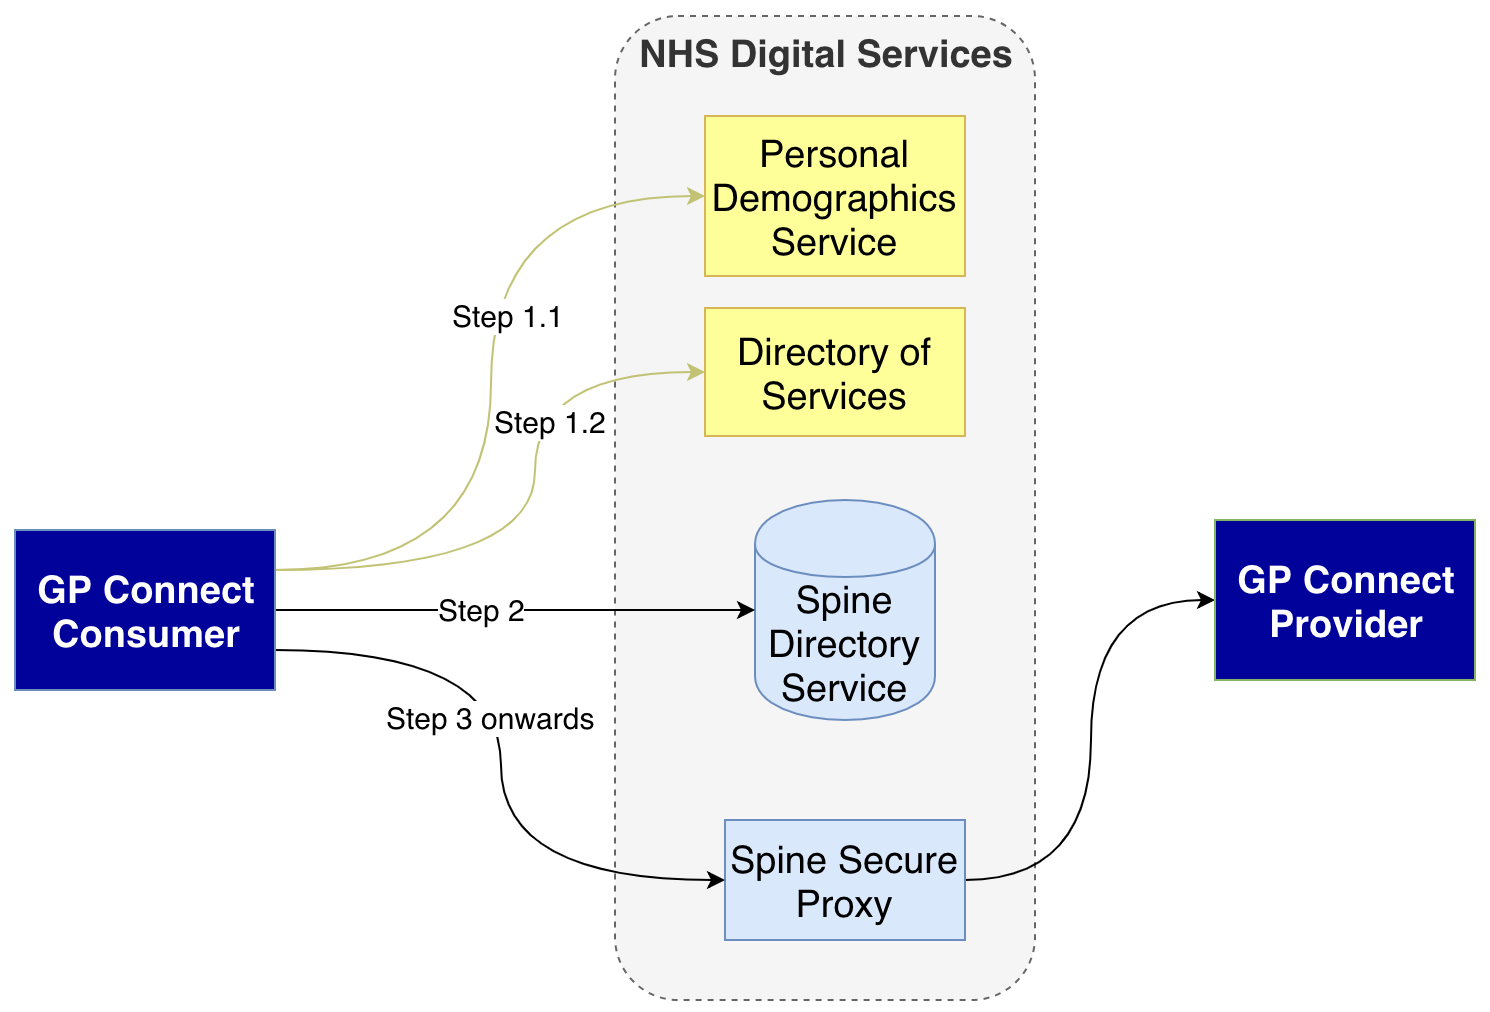 Diagram showing the high level four step flow for making GP Connect calls when using Directory of Services